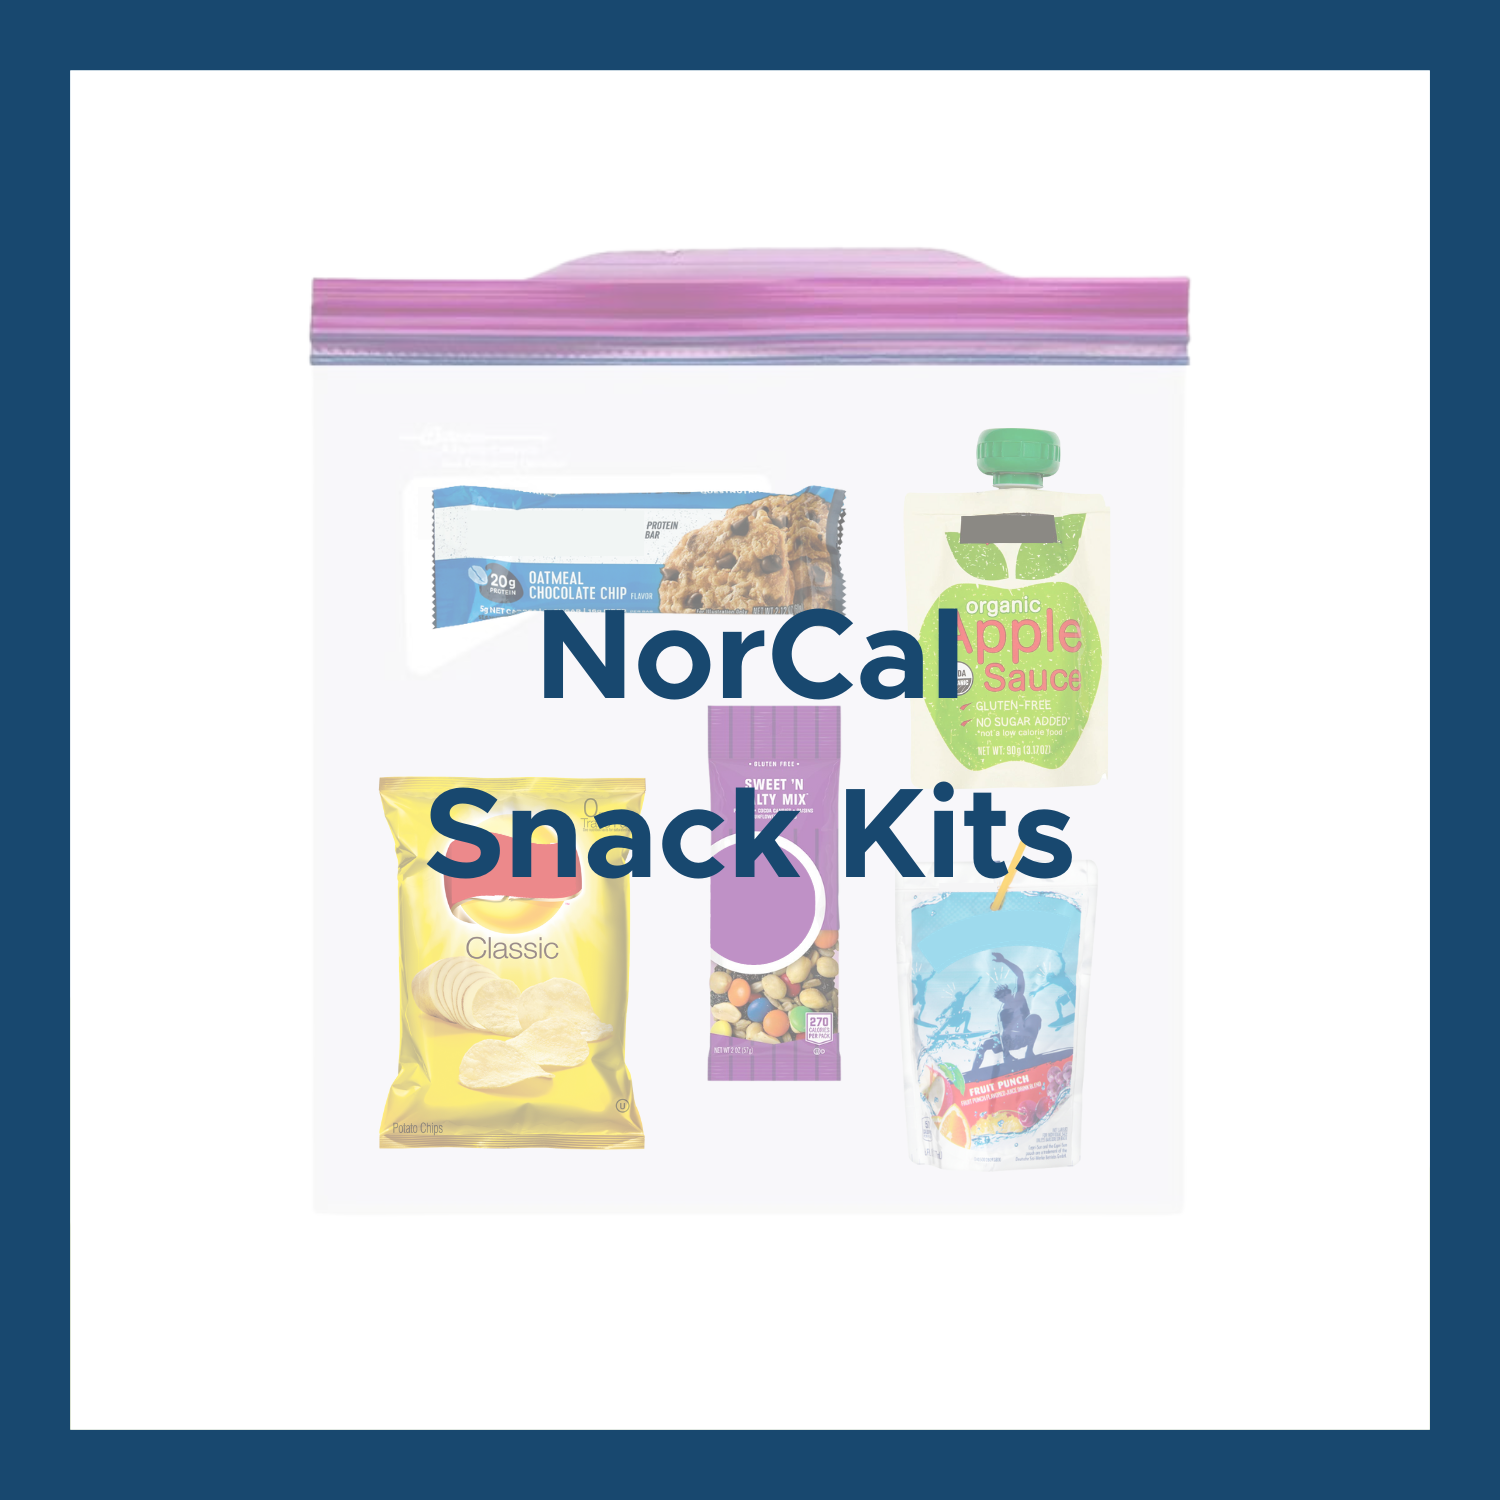 NorCal Snack Kits